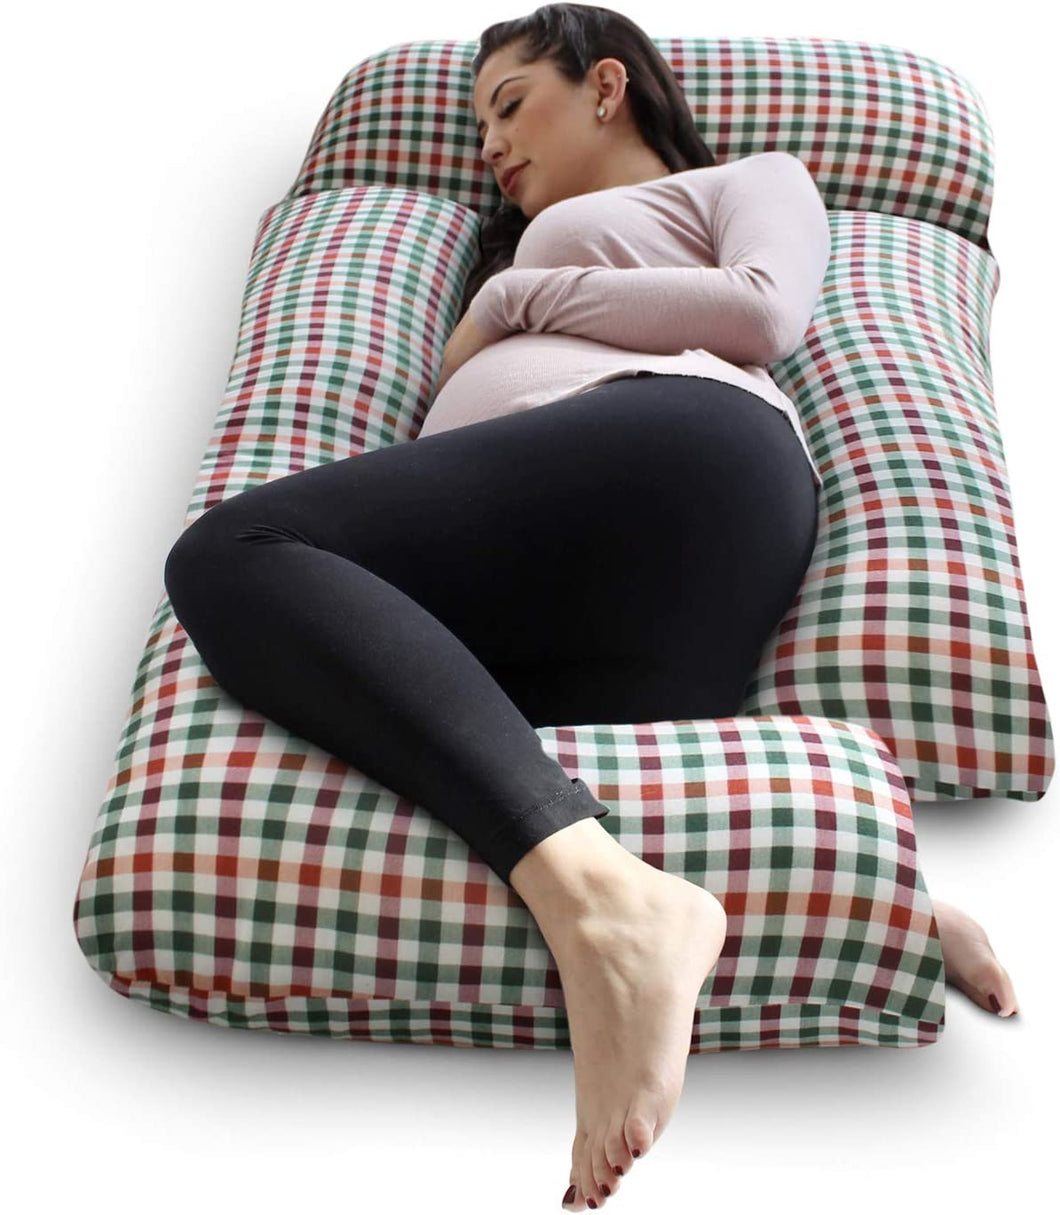 Pharmedoc SleepNook Pregnancy Pillow - 3 Piece Full Body Maternity Pillow with Super Soft Jersey Cover